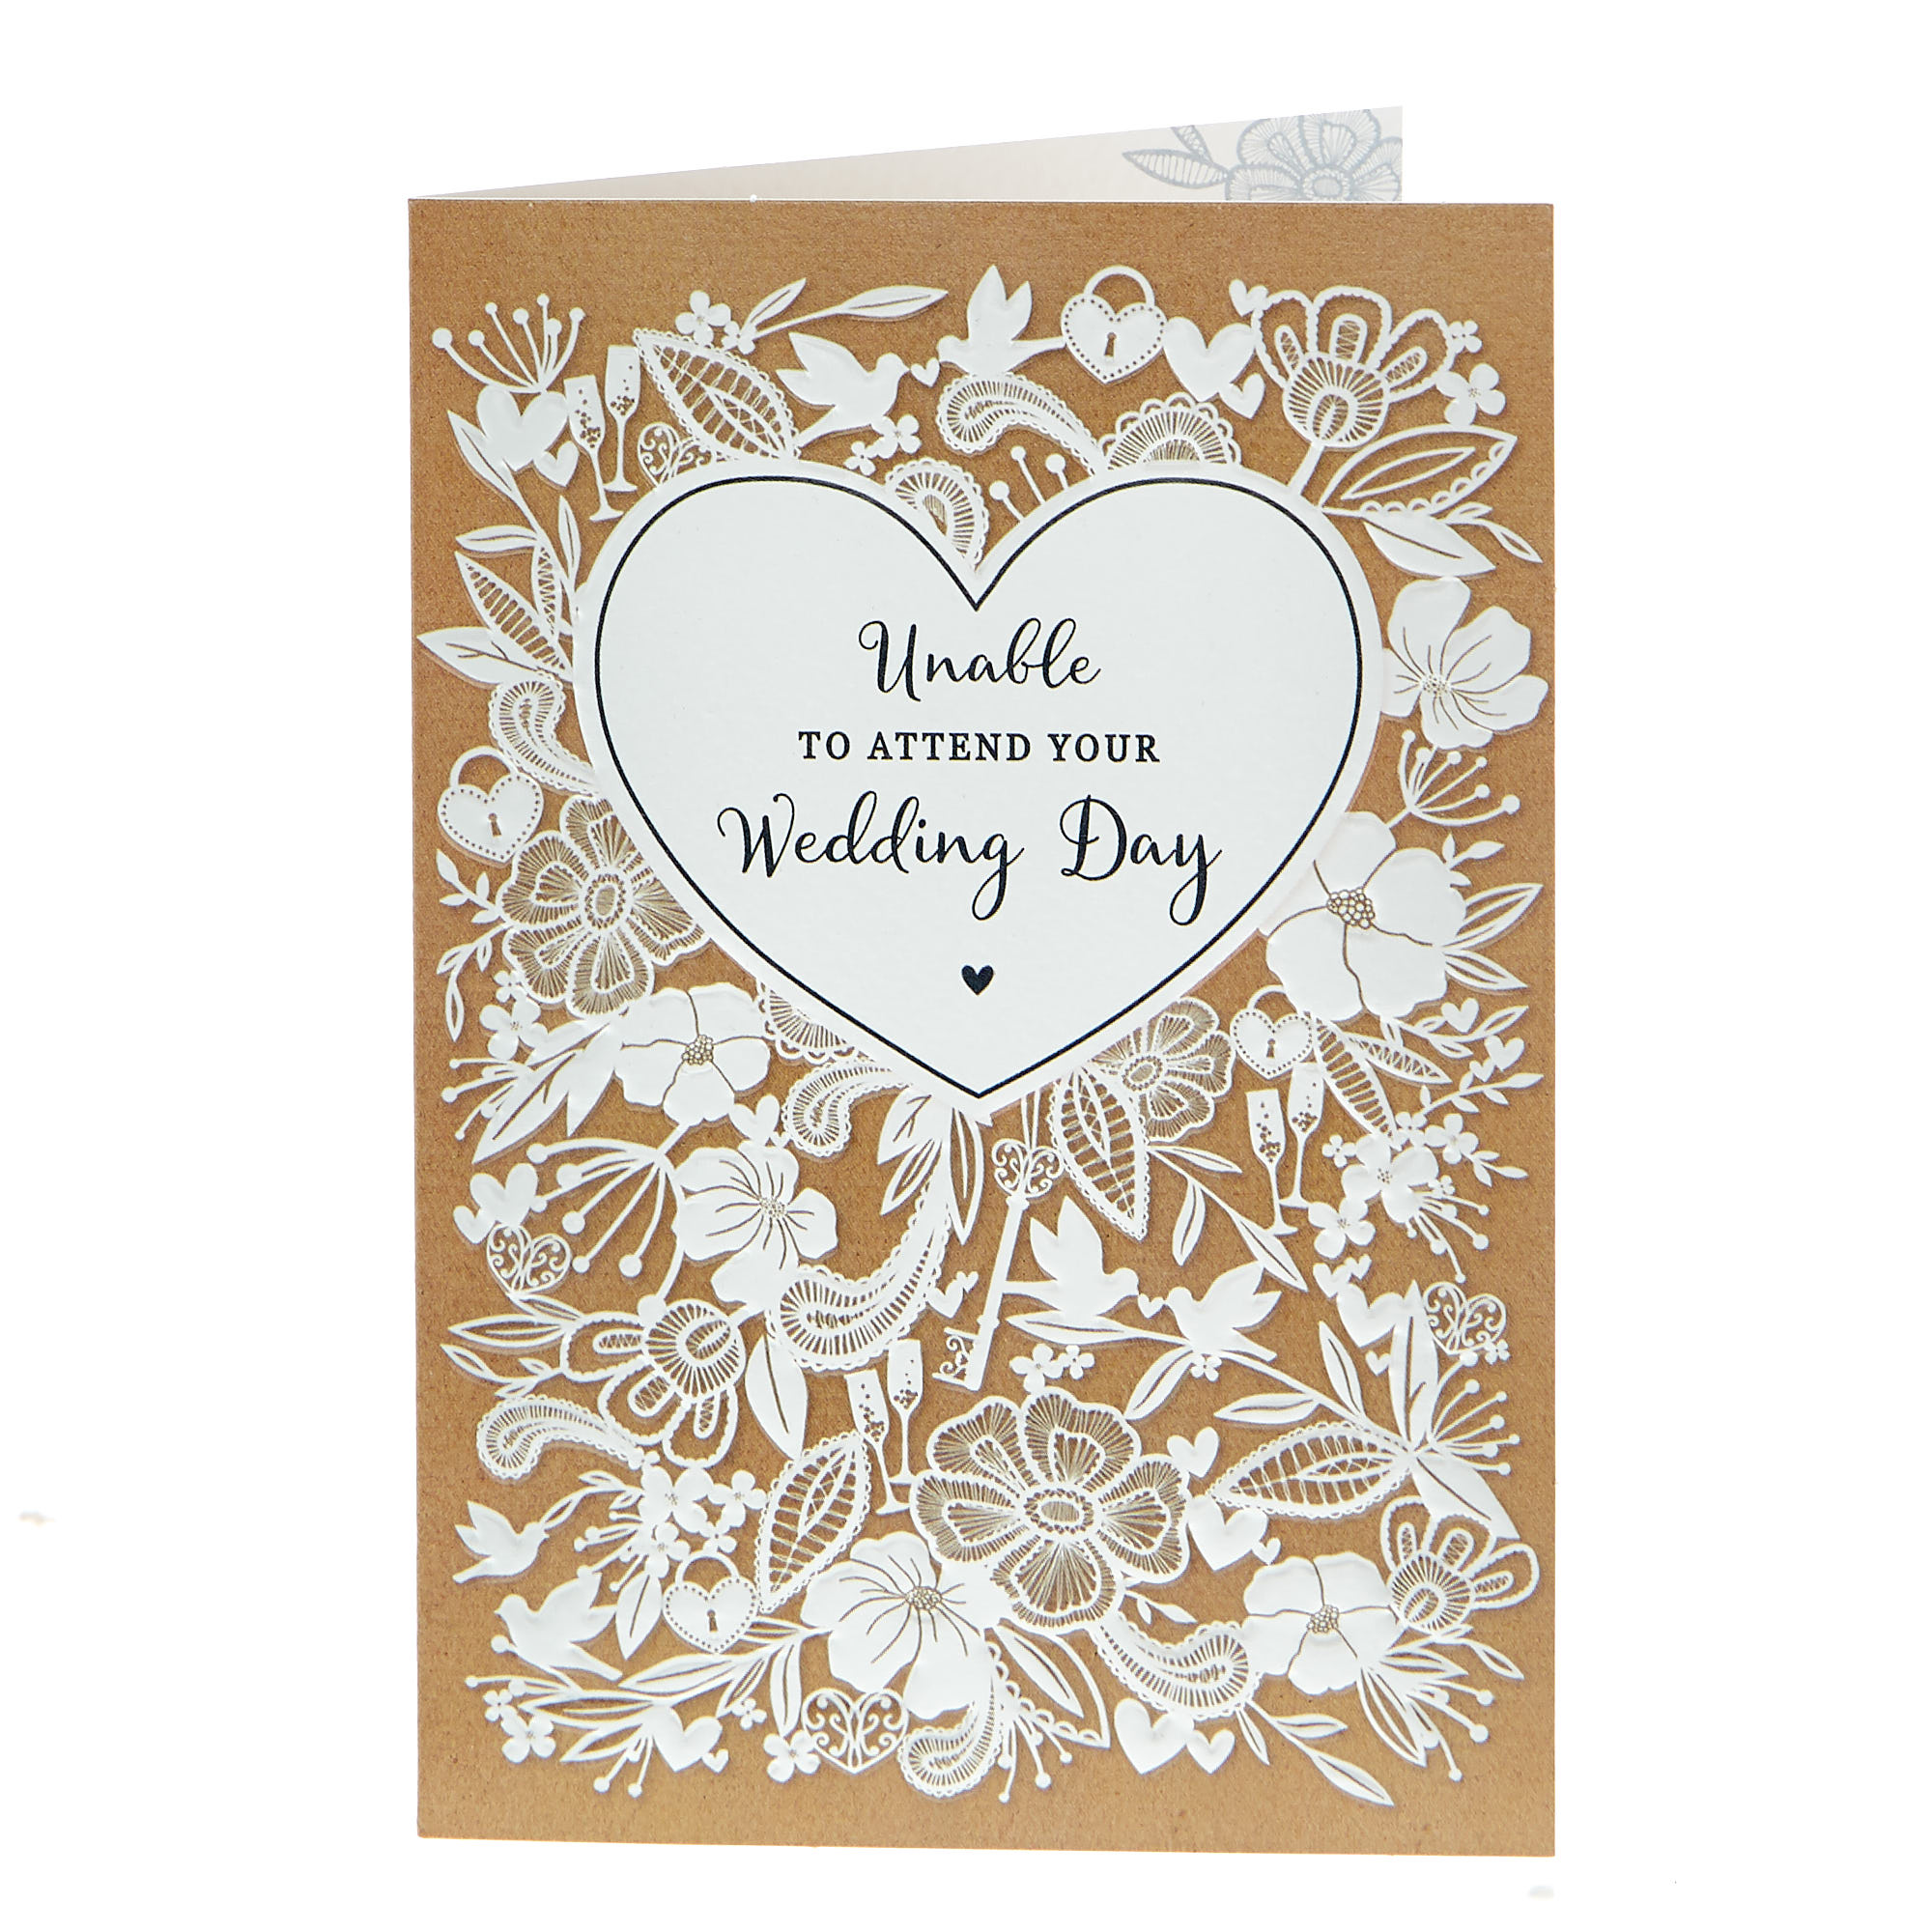 With Regret Wedding Card - Unable To Attend